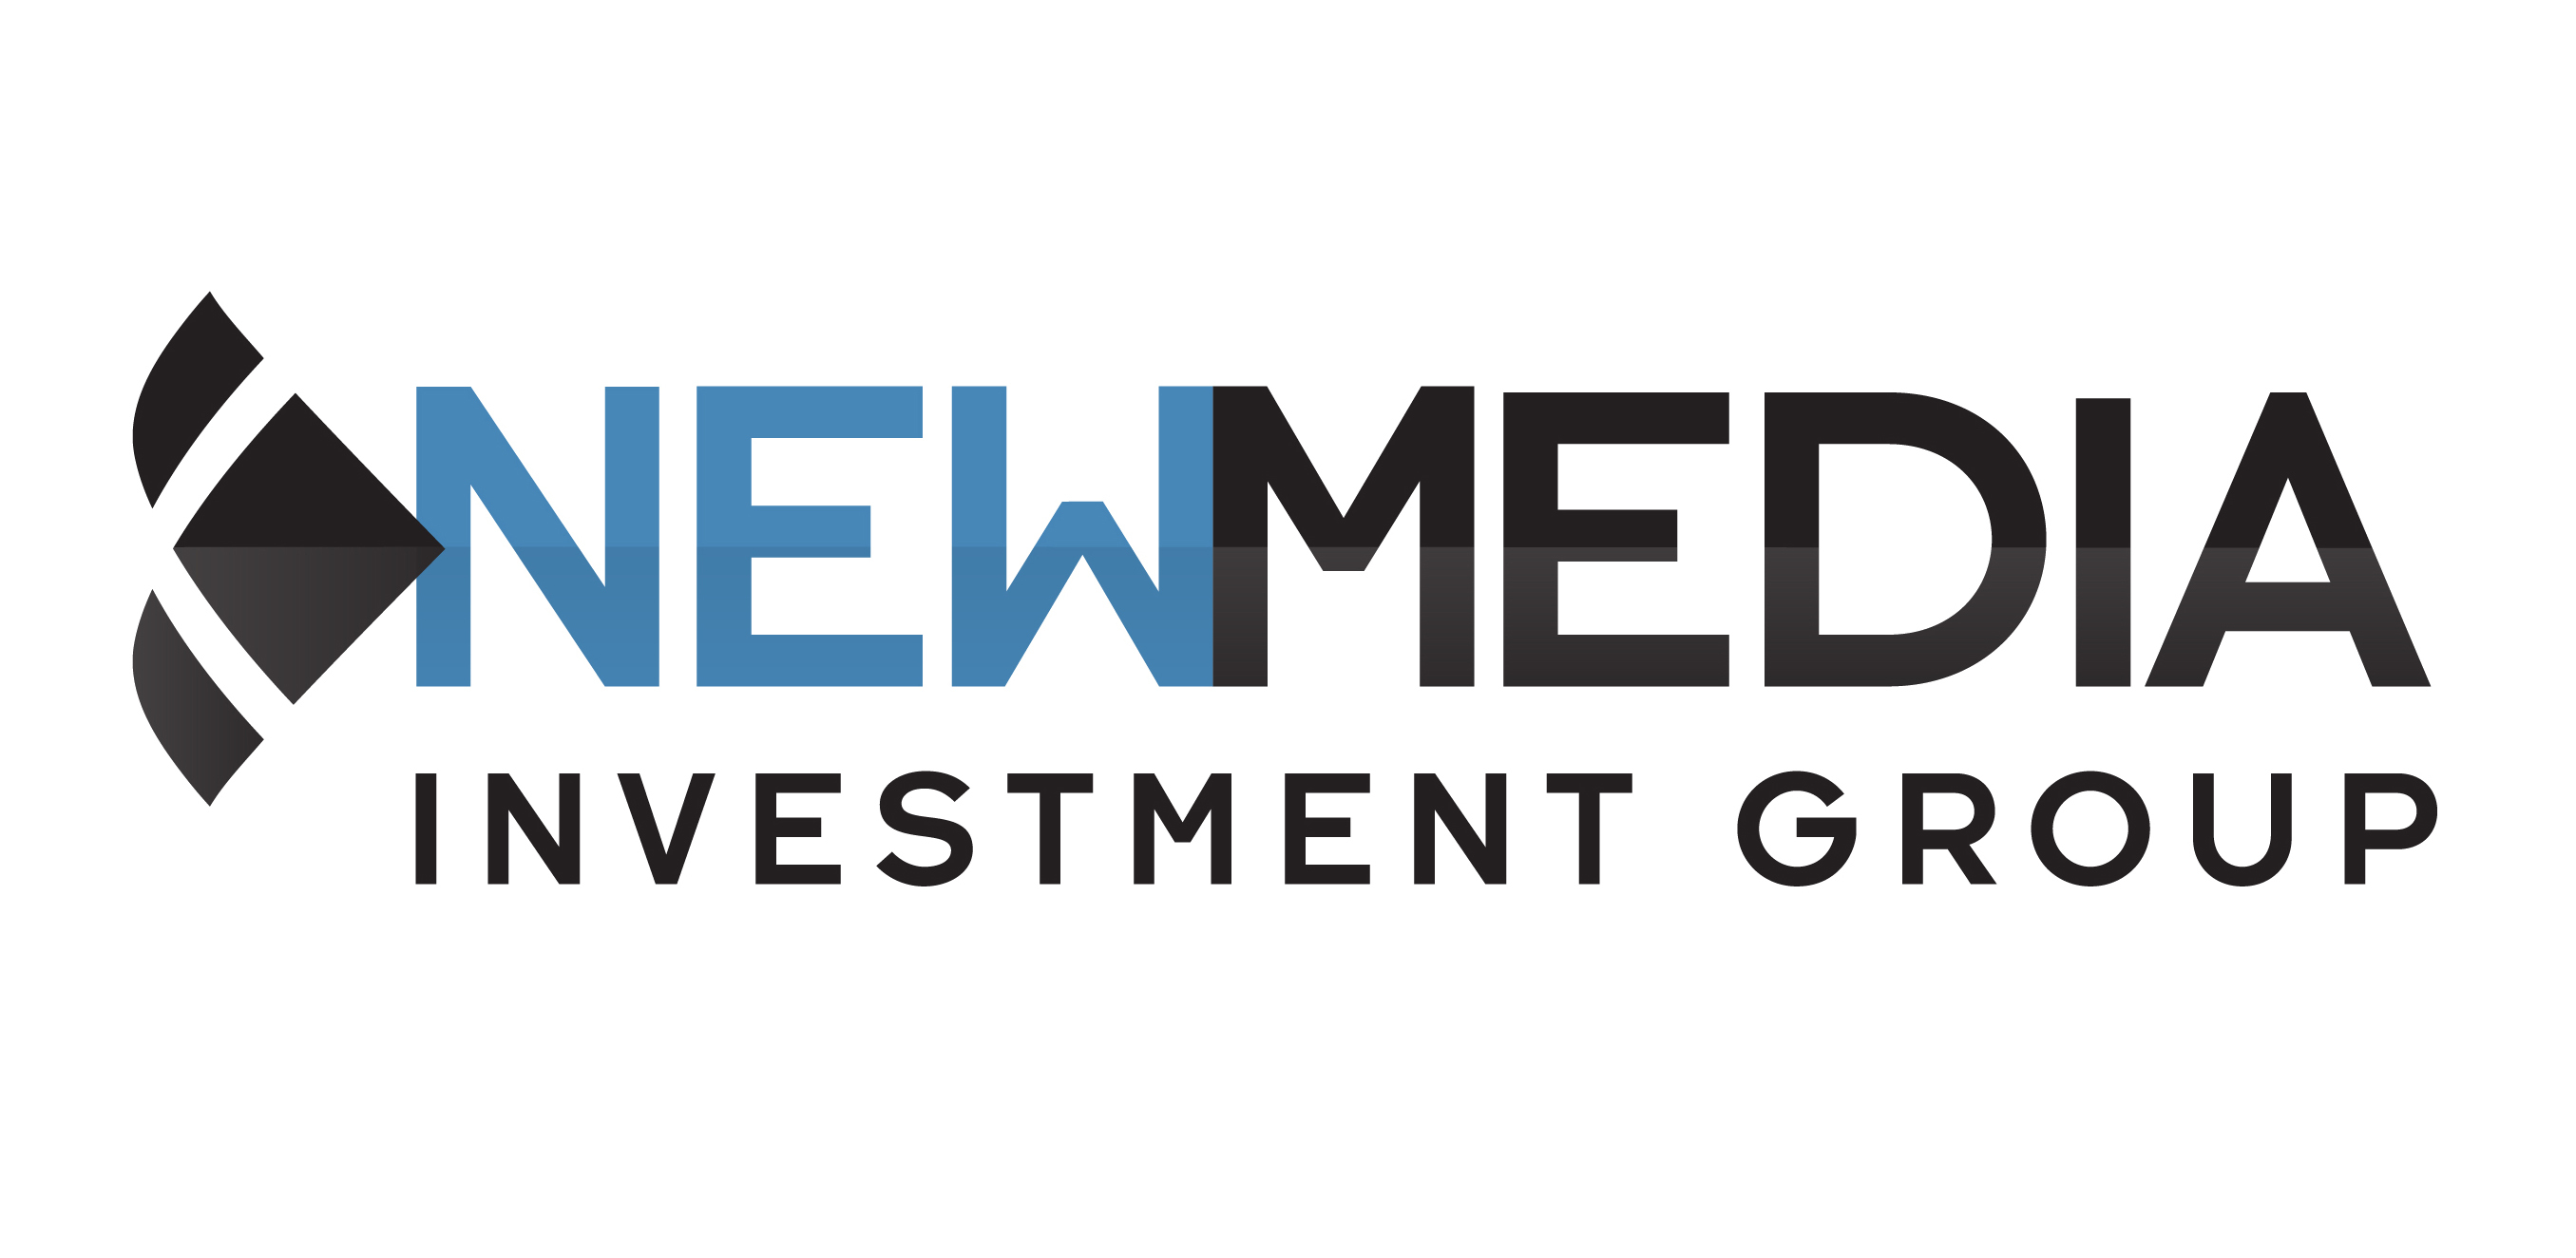 What Is The Symbol Of New Media Investment Group, Inc?